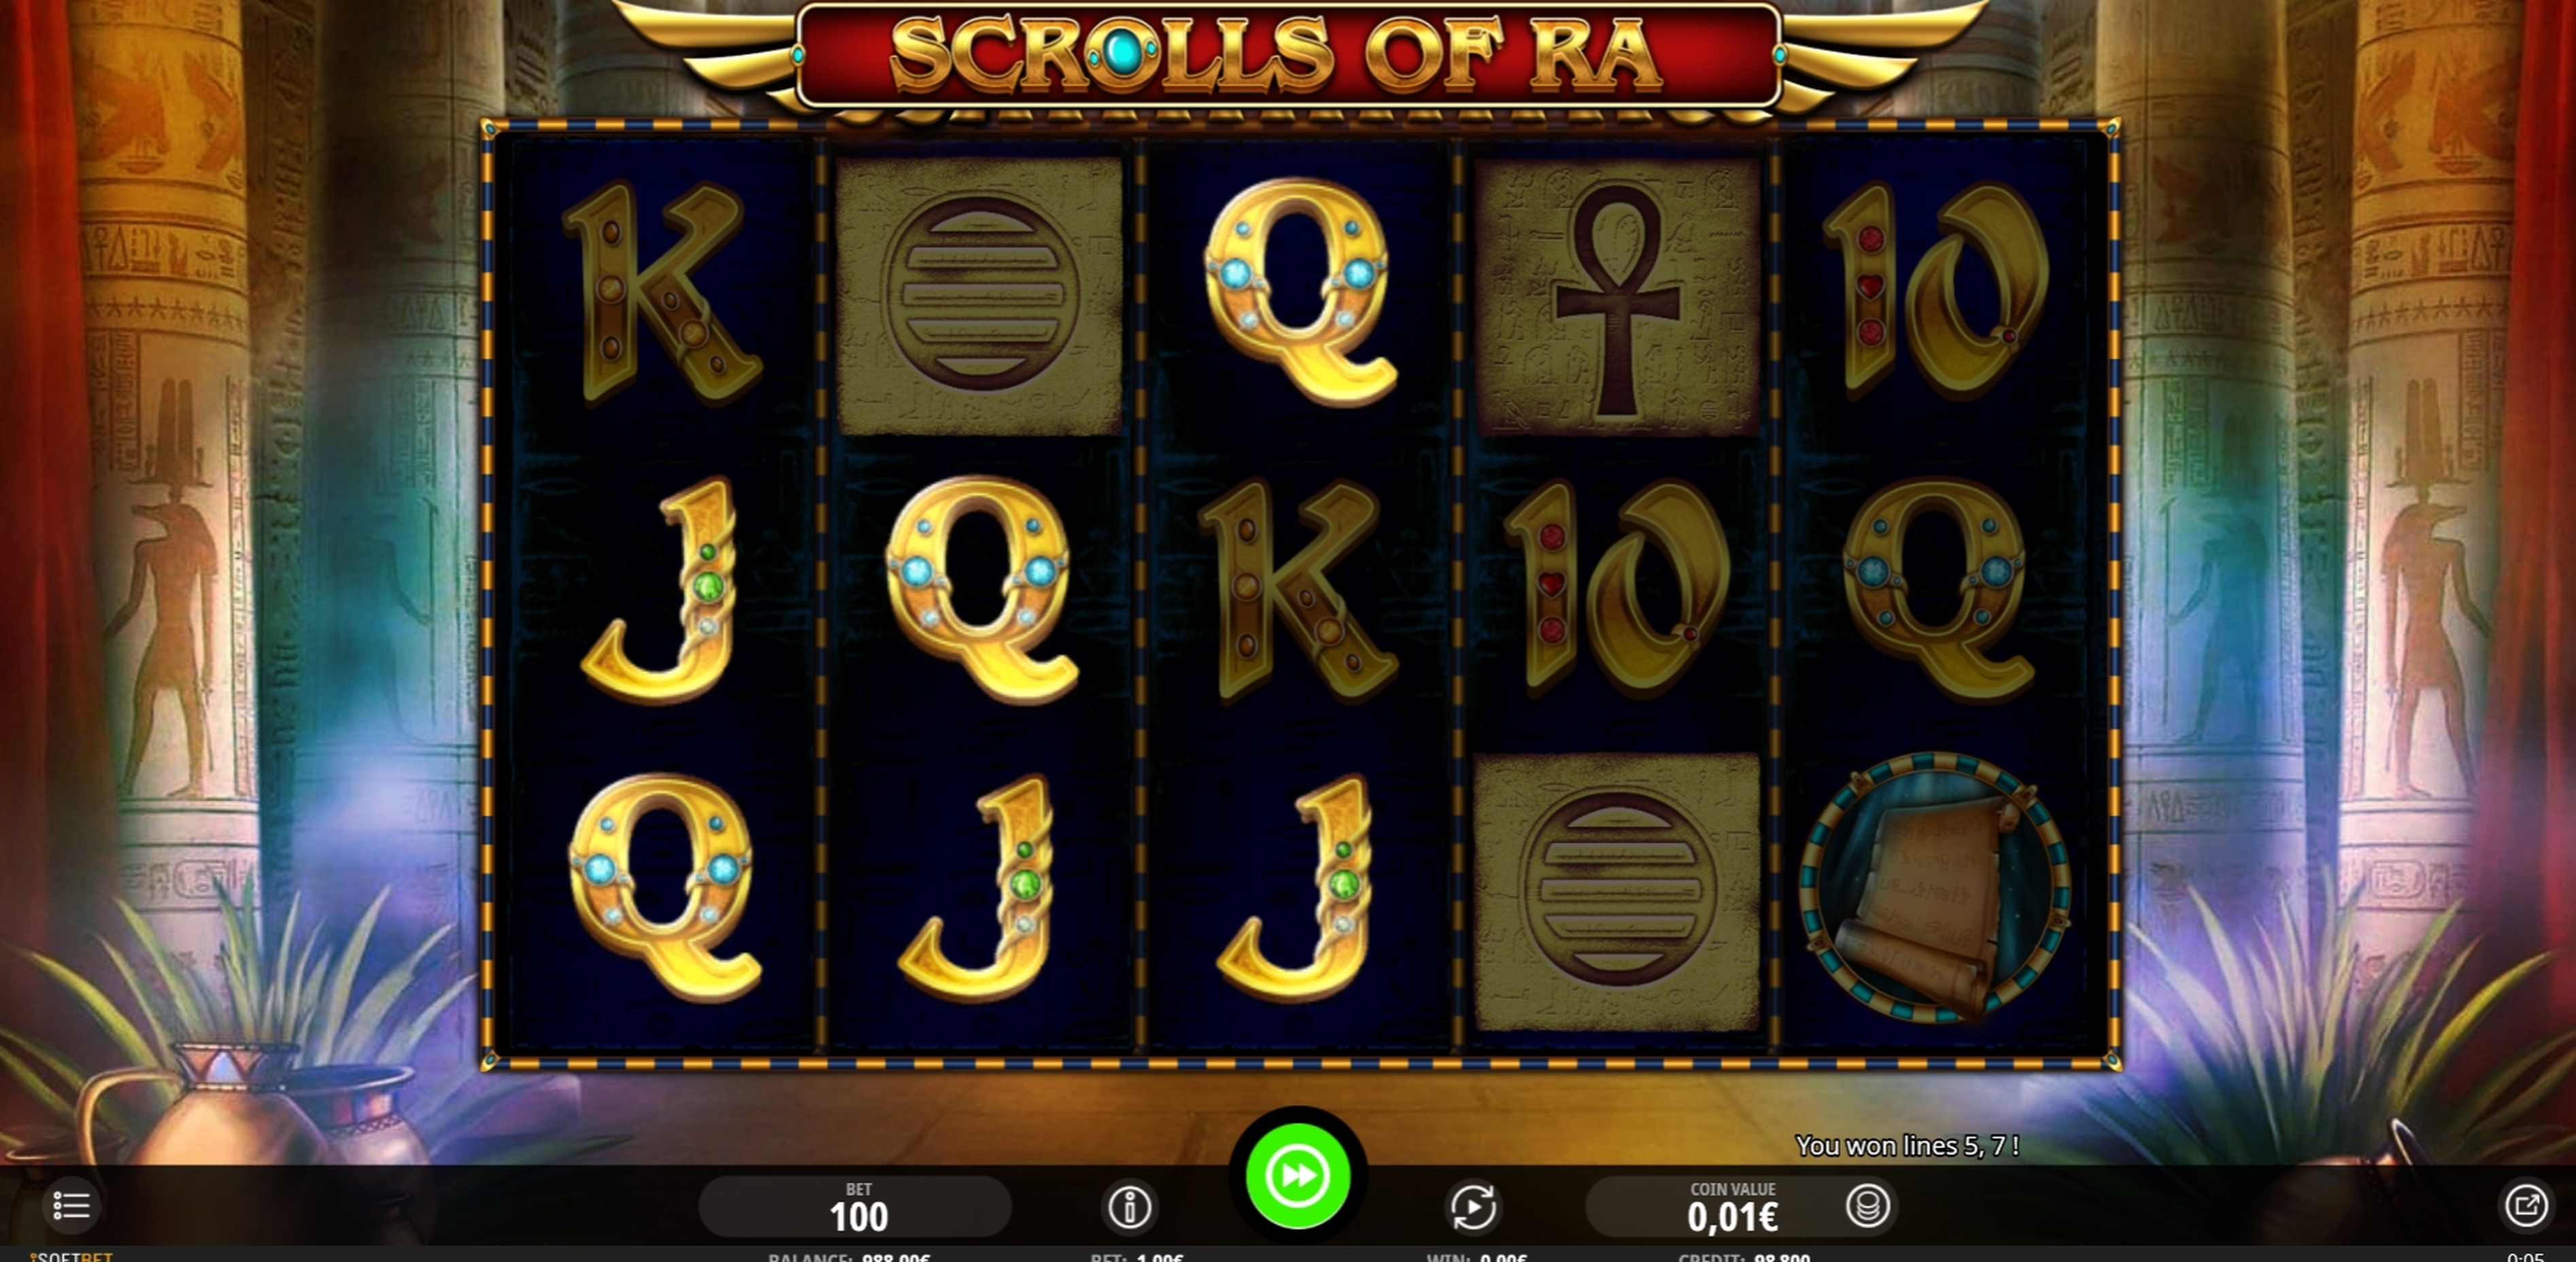 Win Money in Scrolls of RA Free Slot Game by iSoftBet